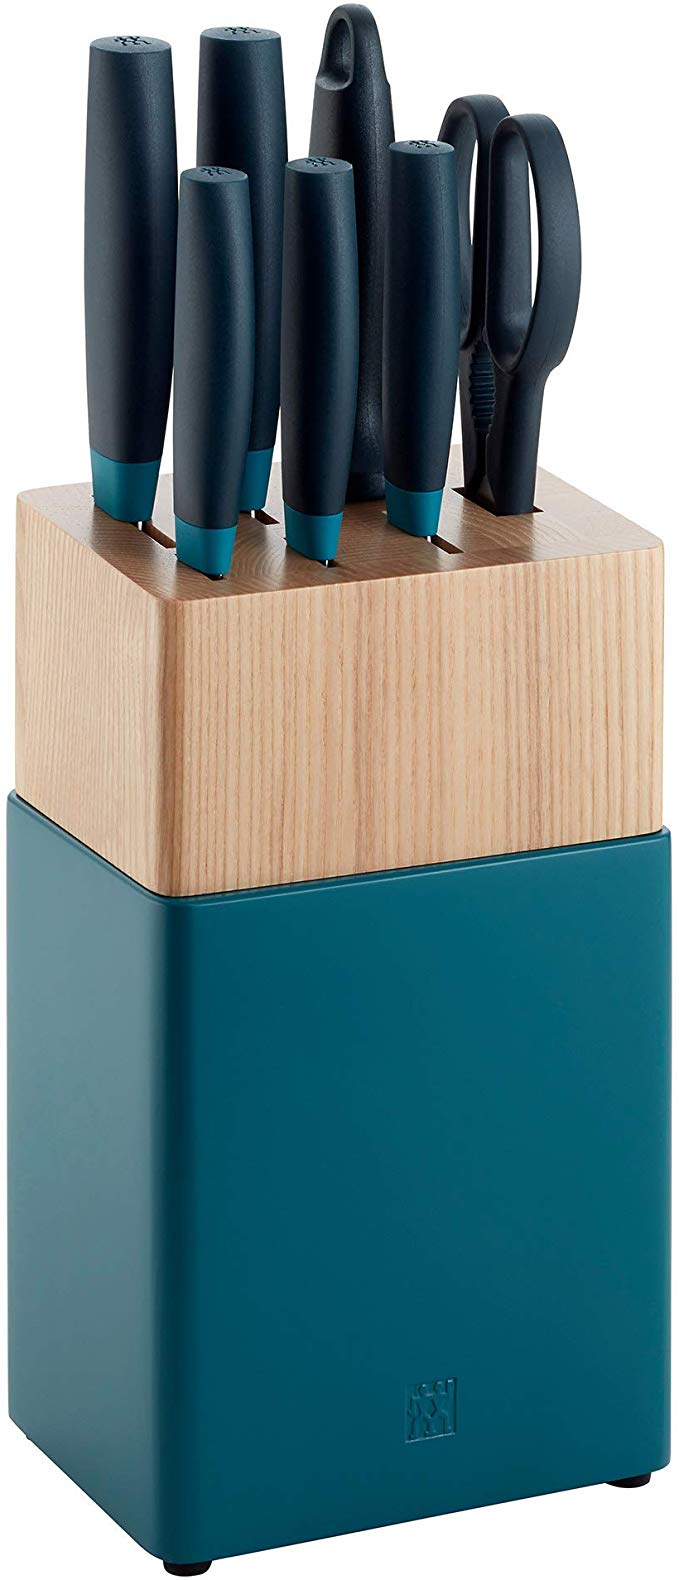 ZWILLING 33410-000 Now S Knife Block Set, 8-pc, Blueberry Blue